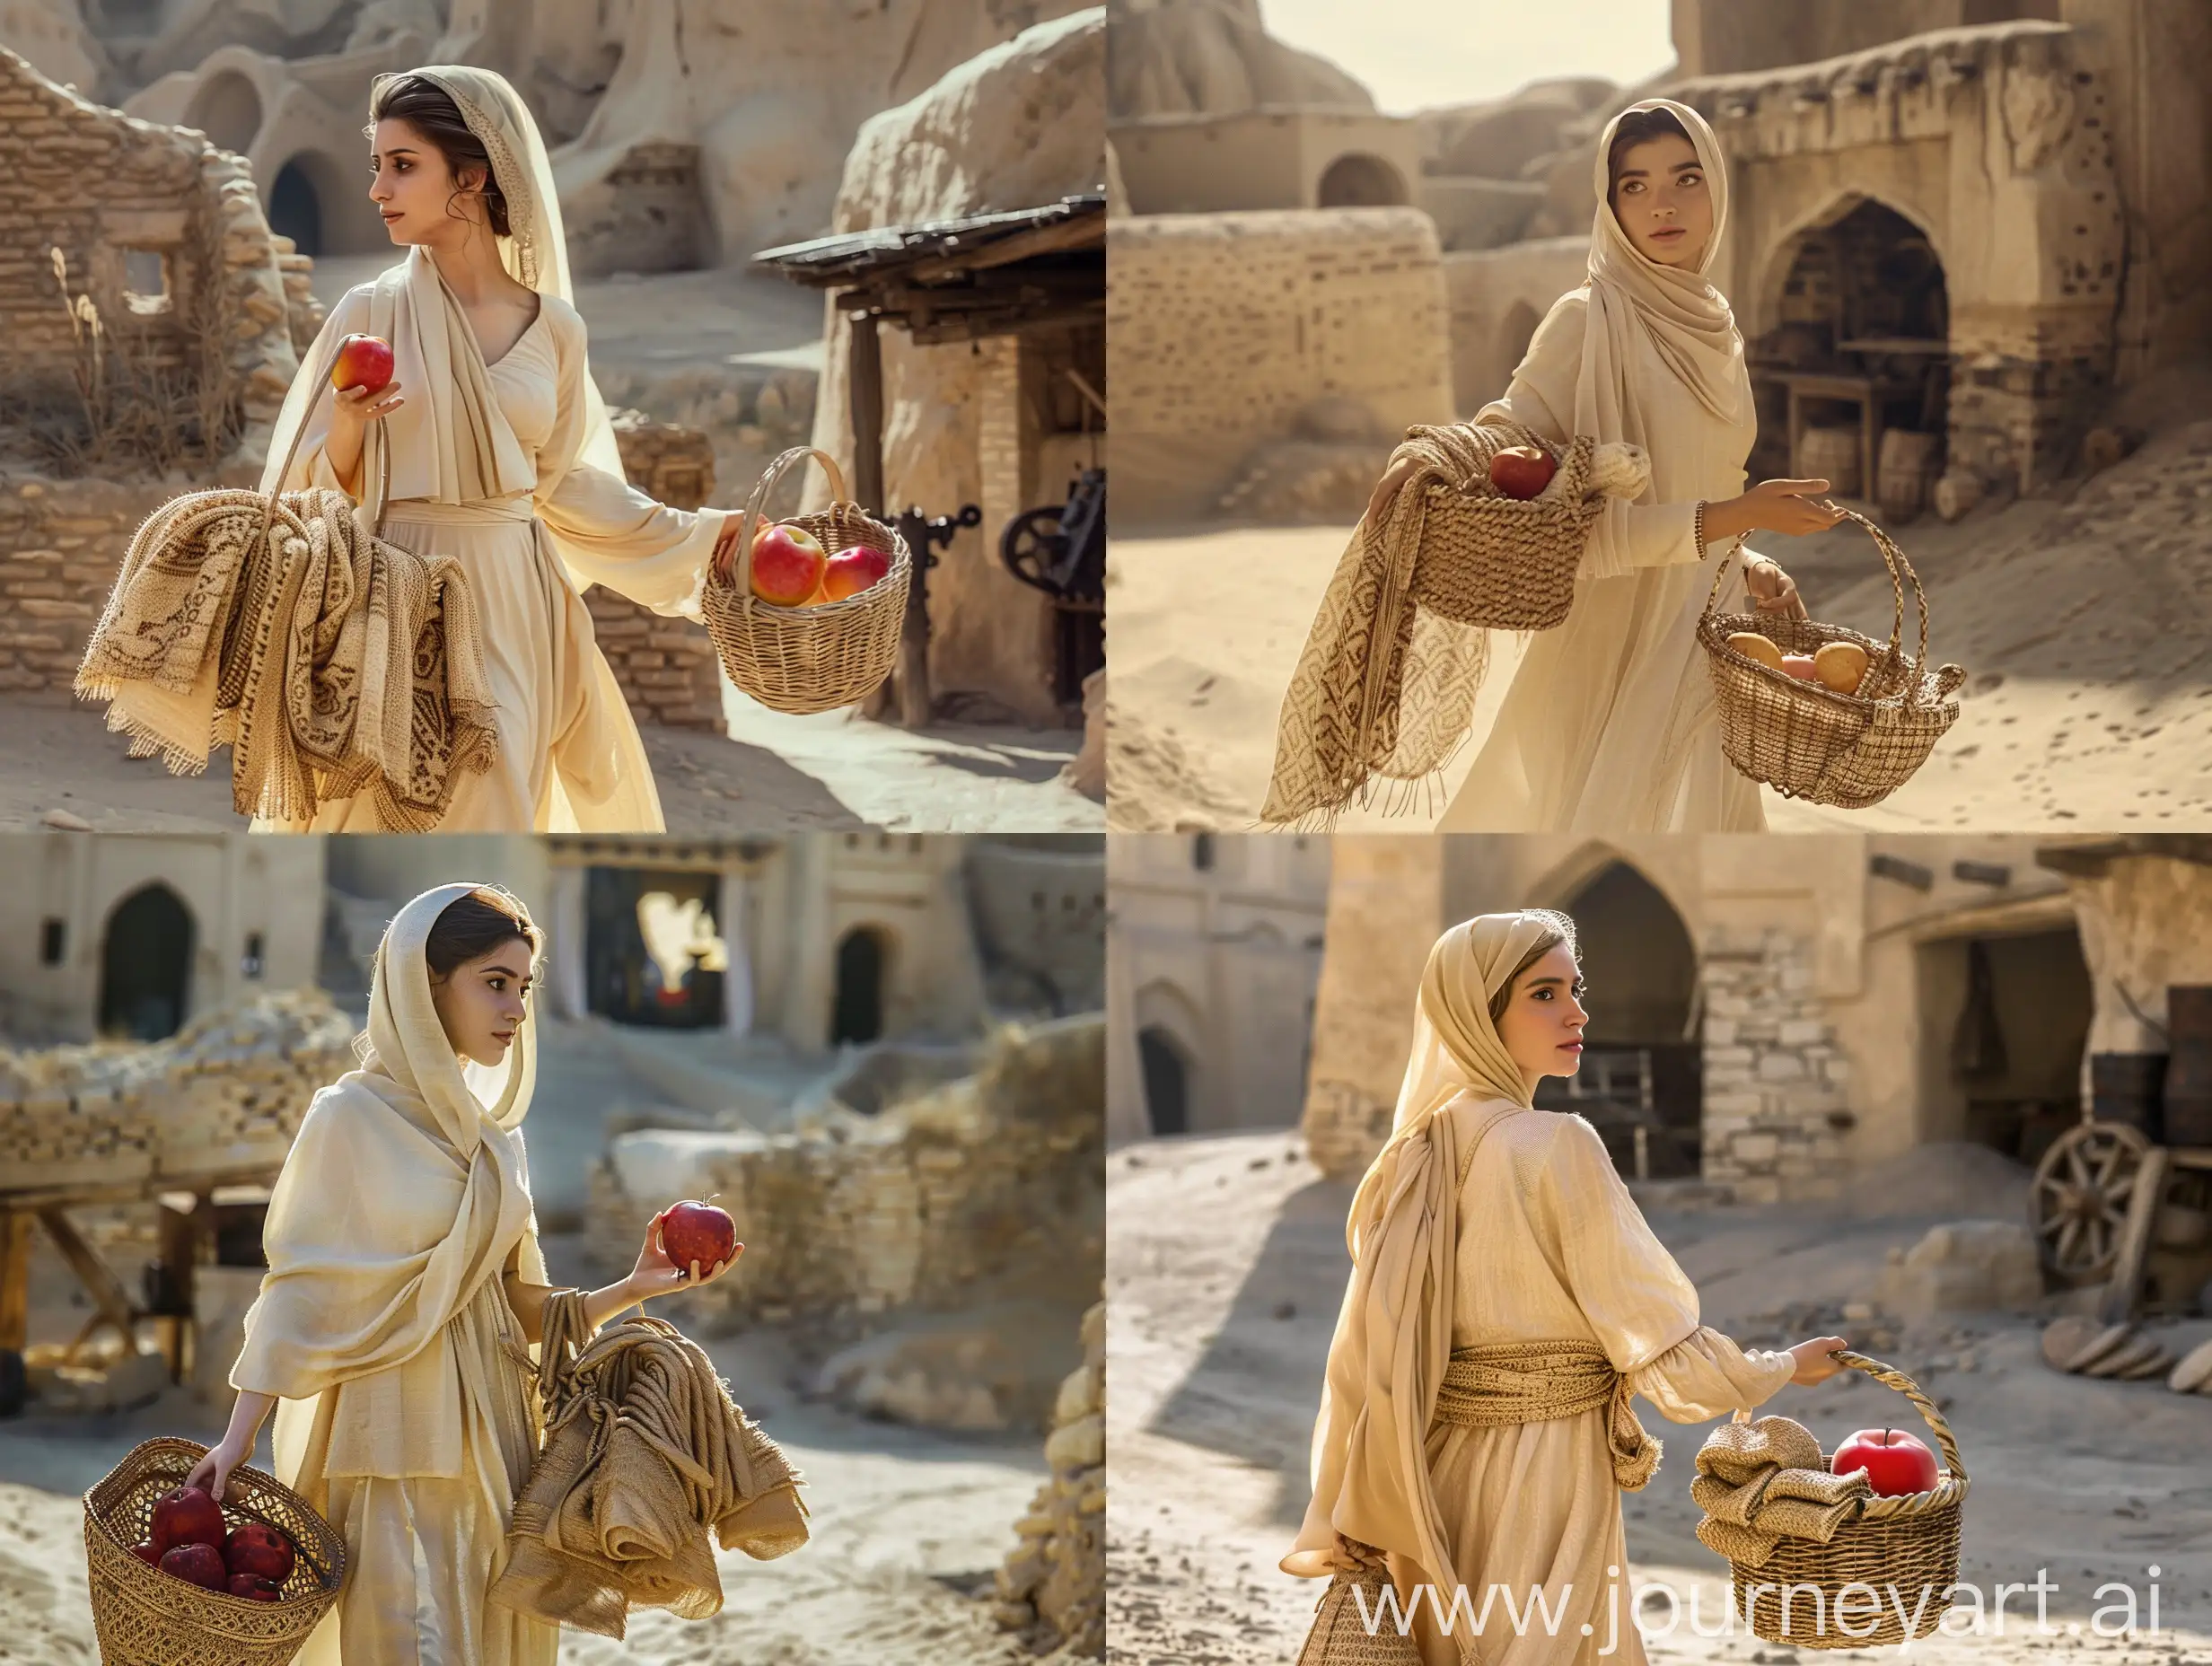 A young Persian woman wearing a cream-colored dress and headscarf, holding a basket full of woven shawls in one hand and an apple the size of a watermelon in the other basket, is walking towards an old blacksmith shop in the Bam citadel of Kerman. in a desert, in an ancient civilization, cinematic, epic realism,8K, highly detailed, glamour lighting, backlit 